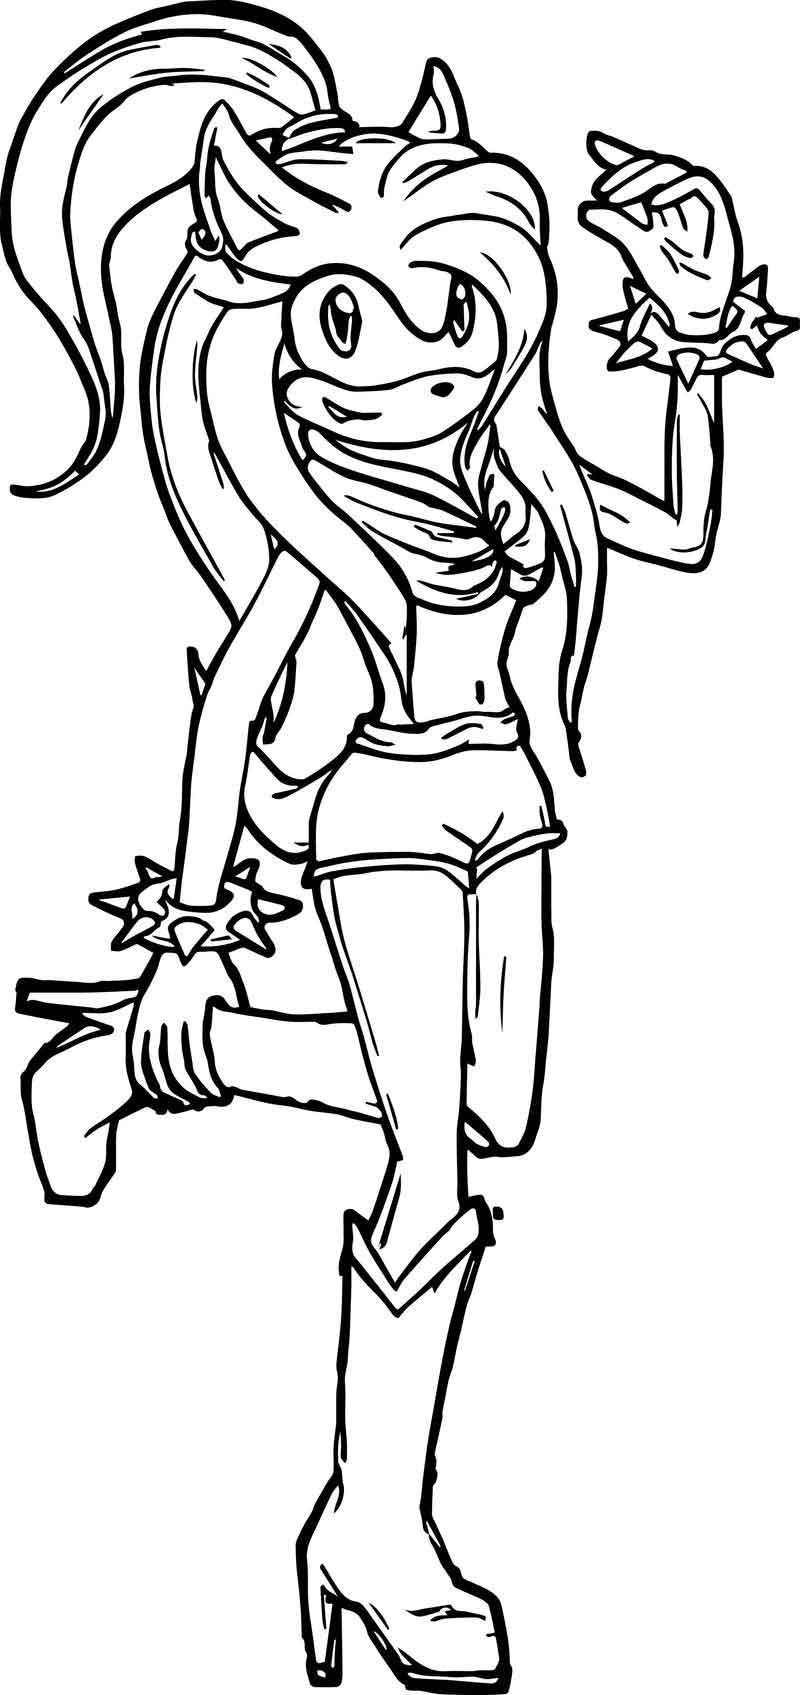 Rock Coloring Page Adult Amy Rose Rock N Roll The Cruelone Coloring Page